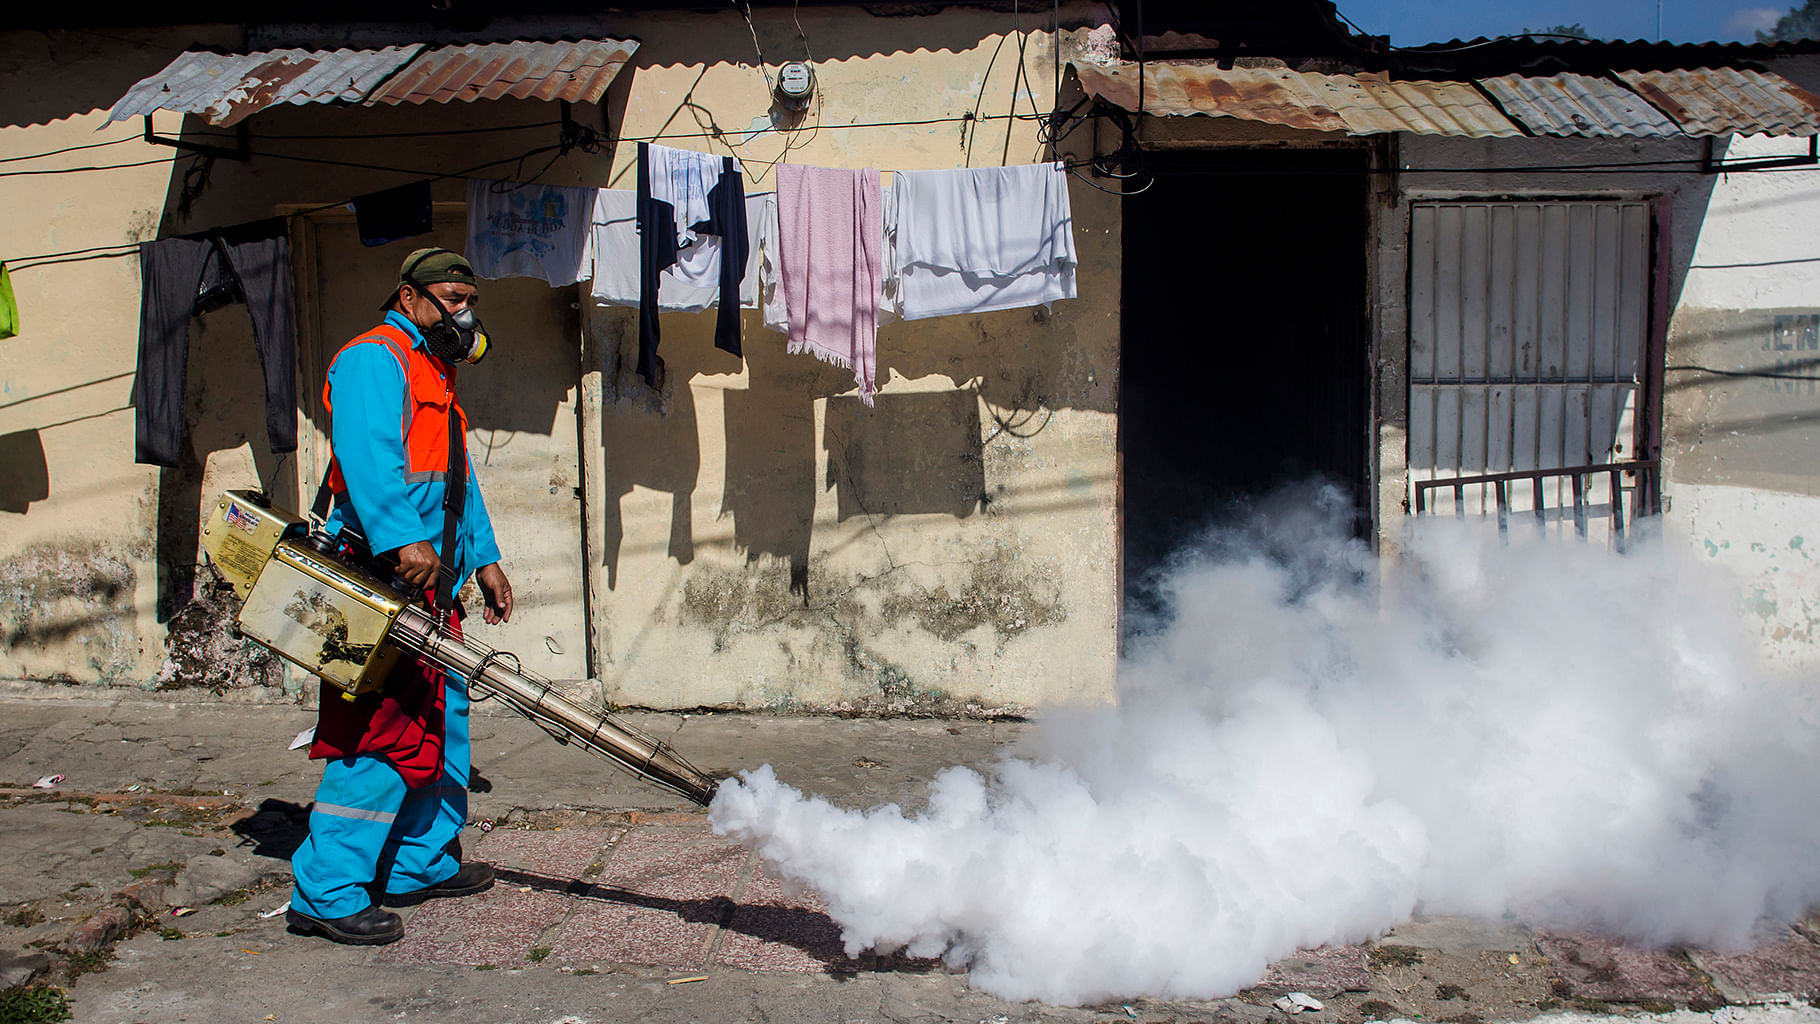 A city worker fumigates to combat the Aedes Aegypti mosquitoes that transmit the Zika virus, at the San Judas Community in San Salvador, El Salvador, on Tuesday, 26 January 2016.  (Photo: AP)